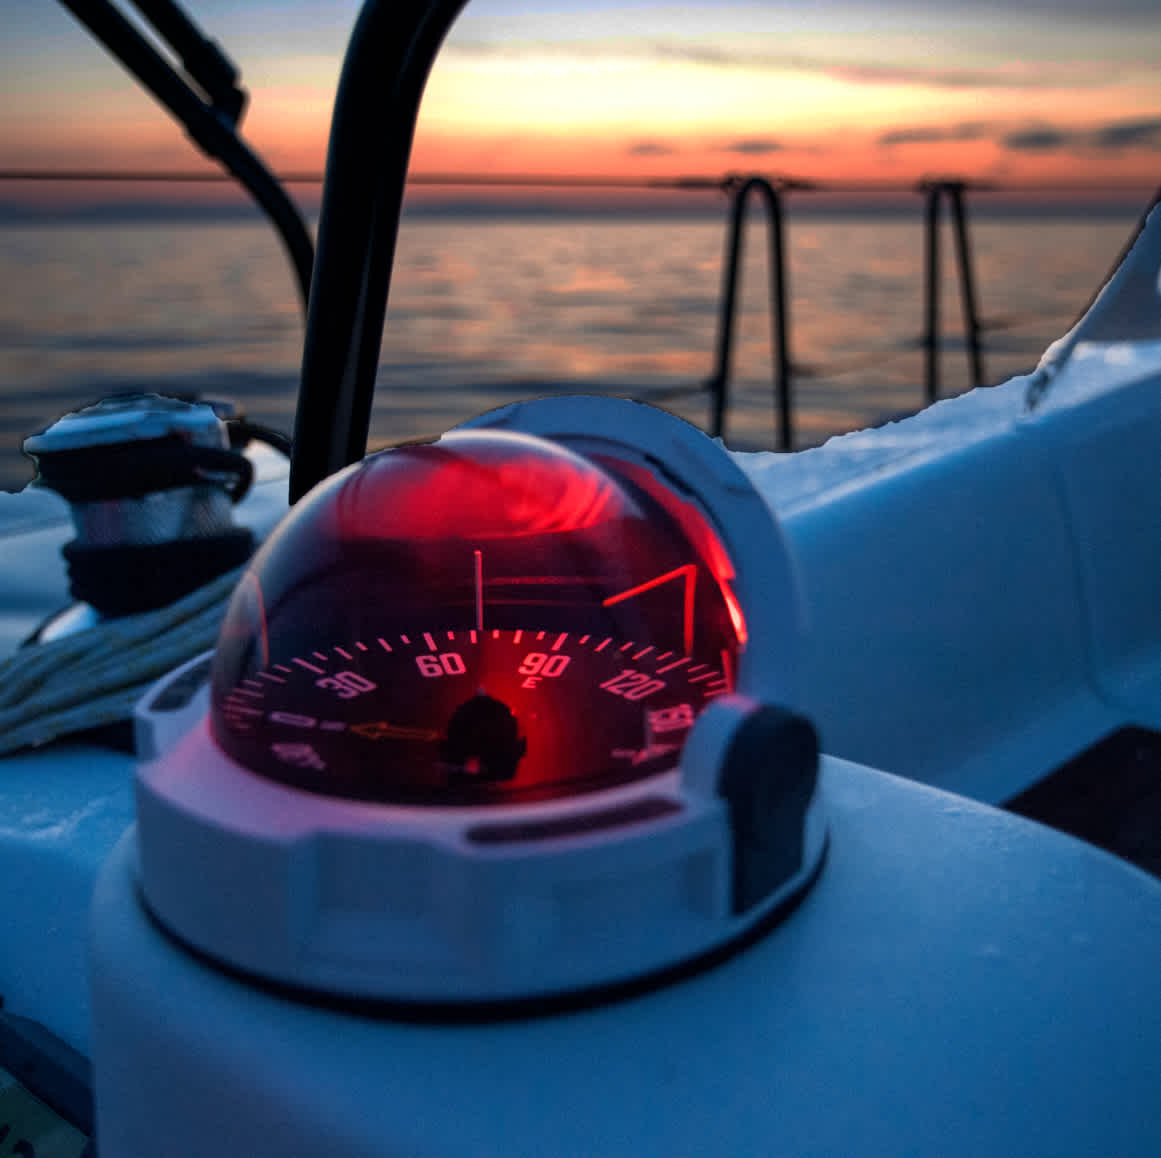 Compass on a yacht at sunset